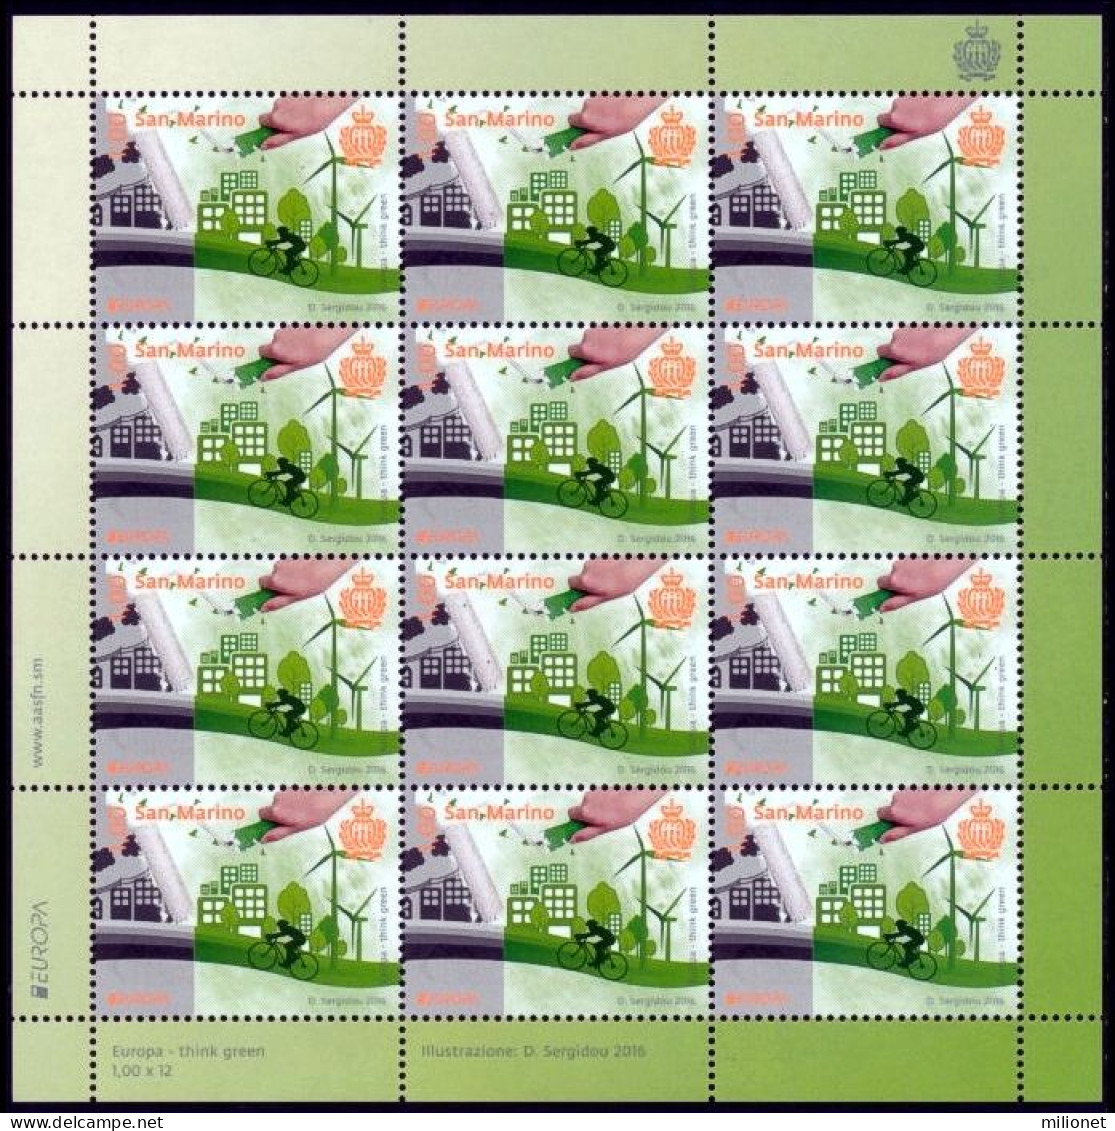 SALE!!! SAN MARINO 2016 EUROPA CEPT Think Green Sheetlet Of 12 Stamps MNH ** - 2016